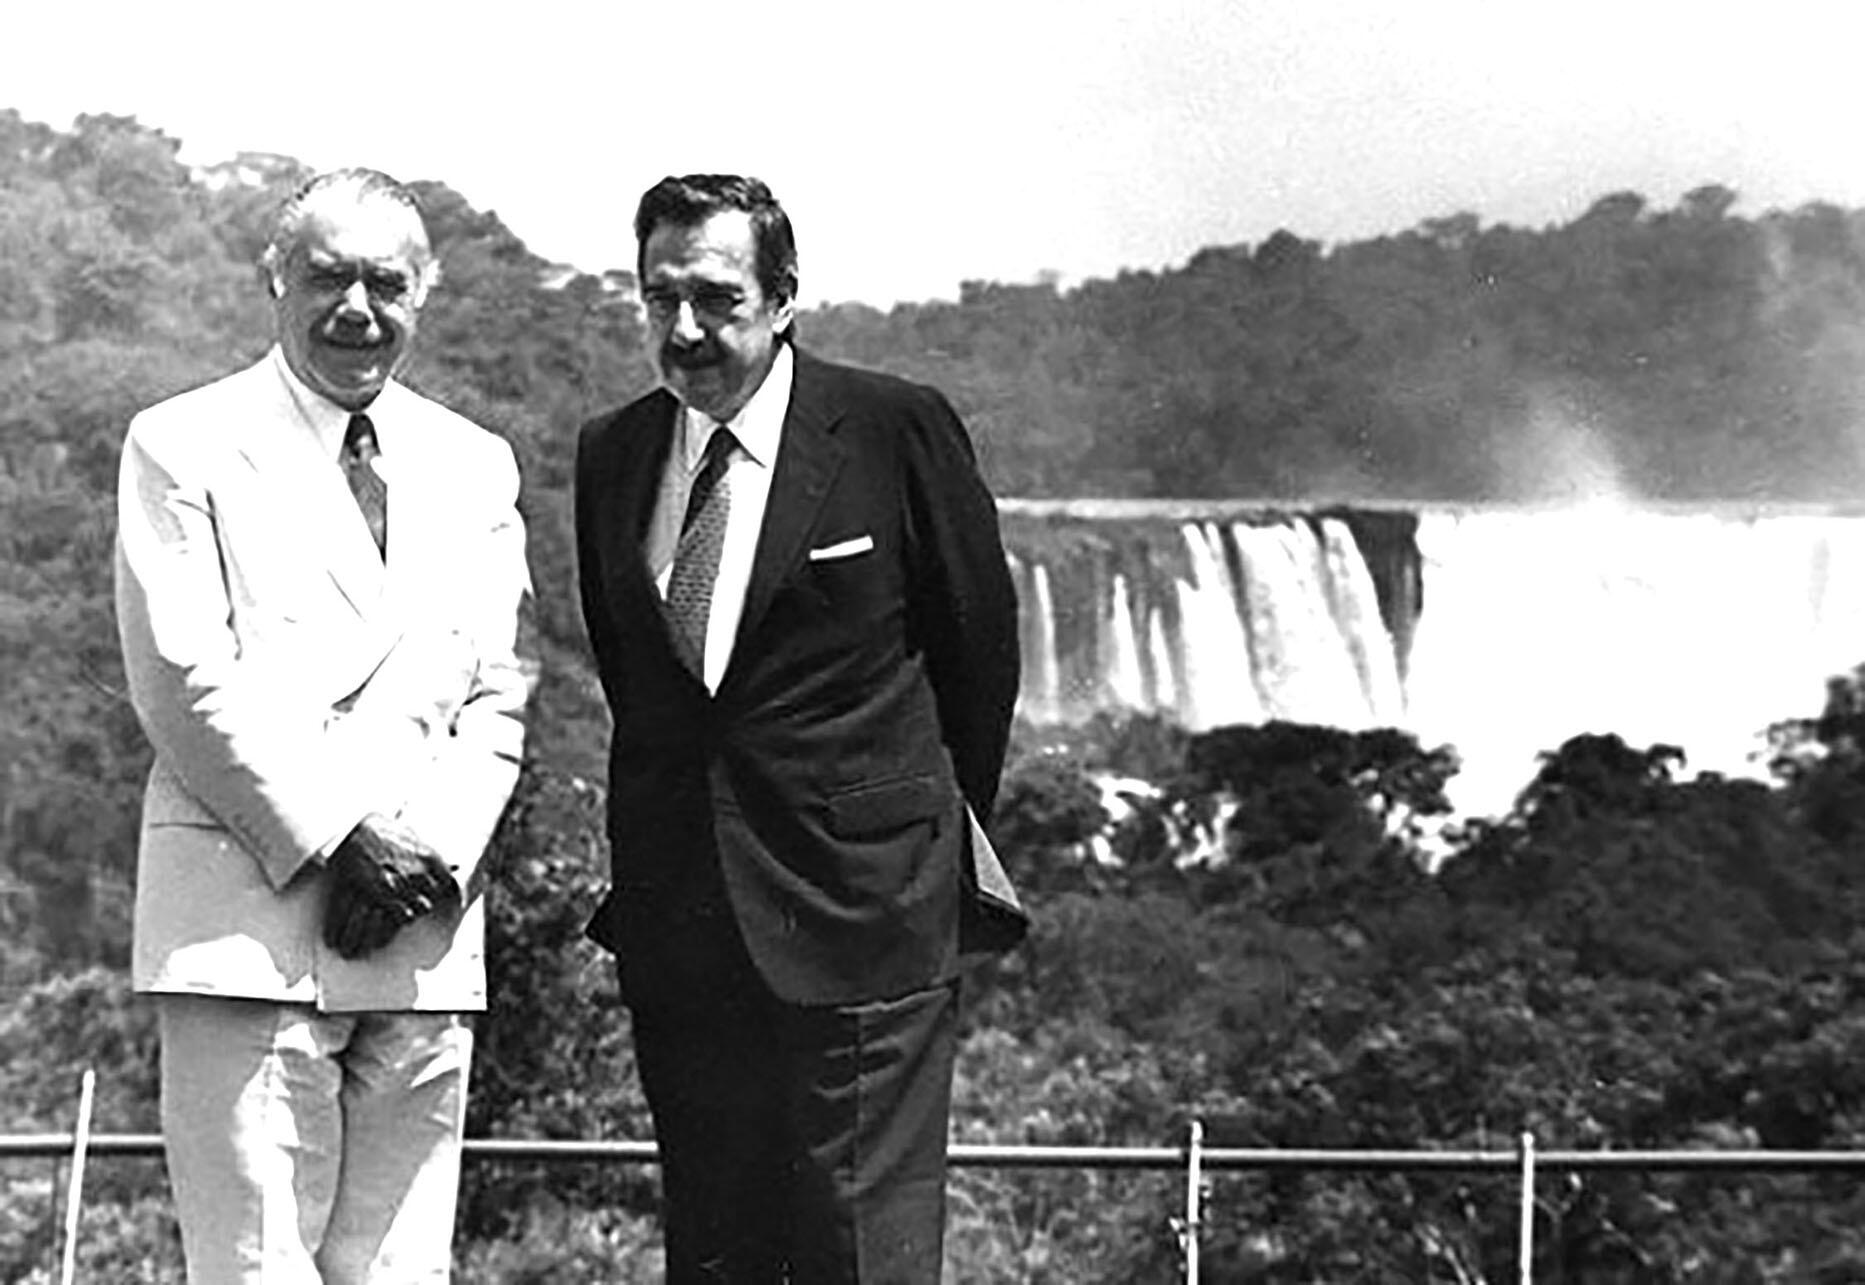 Presidents José Sarney of Brazil and Raúl Alfonsín of Argentina stand in front of the famous waterfalls and issue the “Declaration of Iguaçu” in 1985. (Photo courtesy of IADB.)